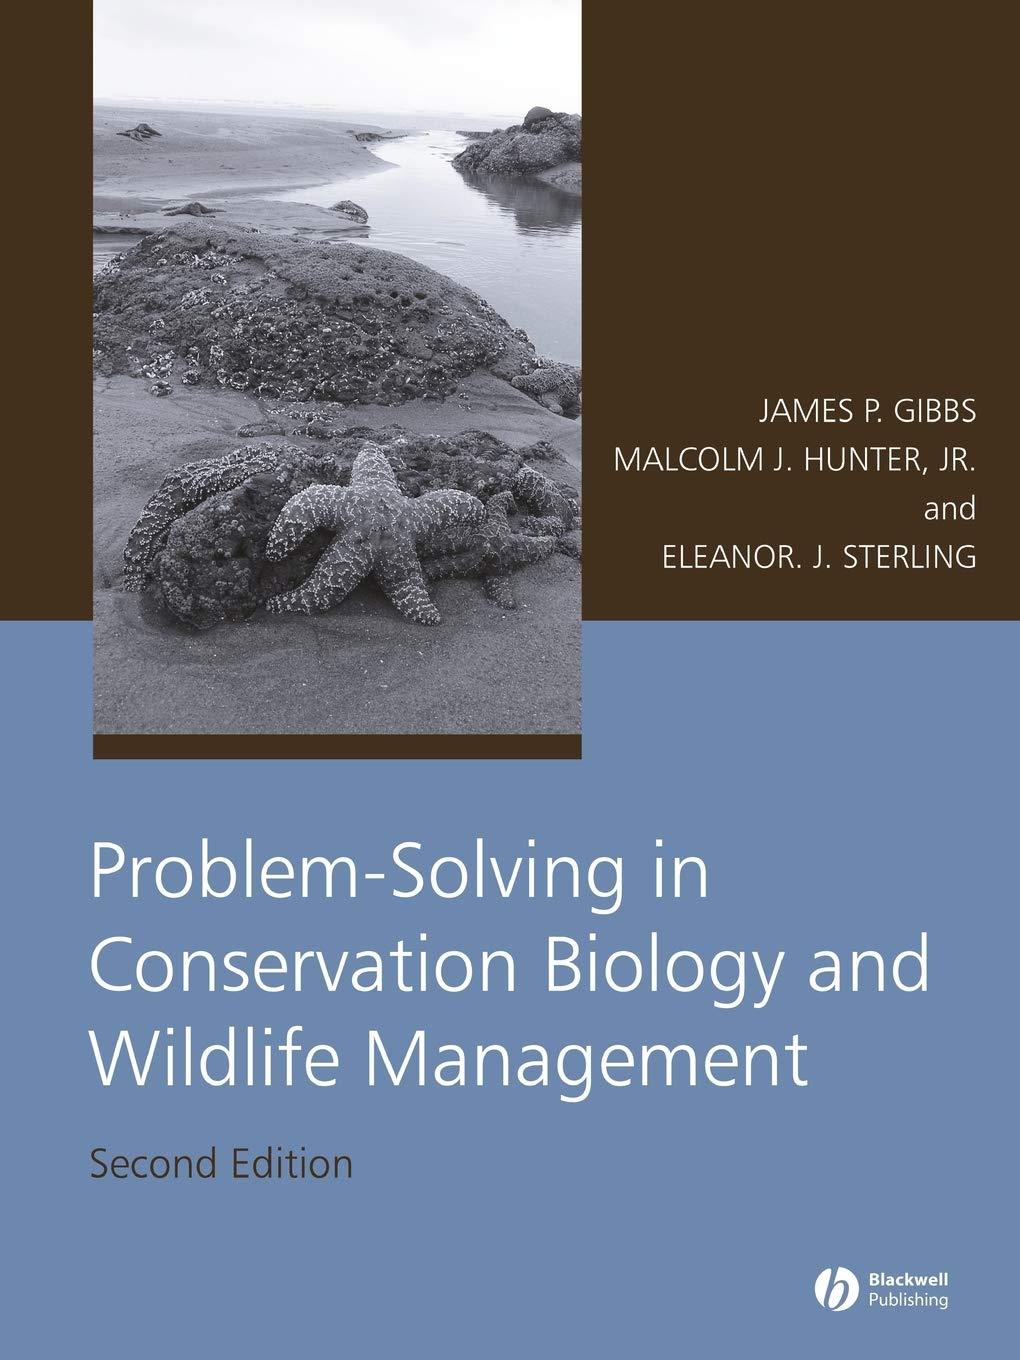 problem-solving in conservation biology and wildlife management 2nd edition james p. gibbs 1405152877,